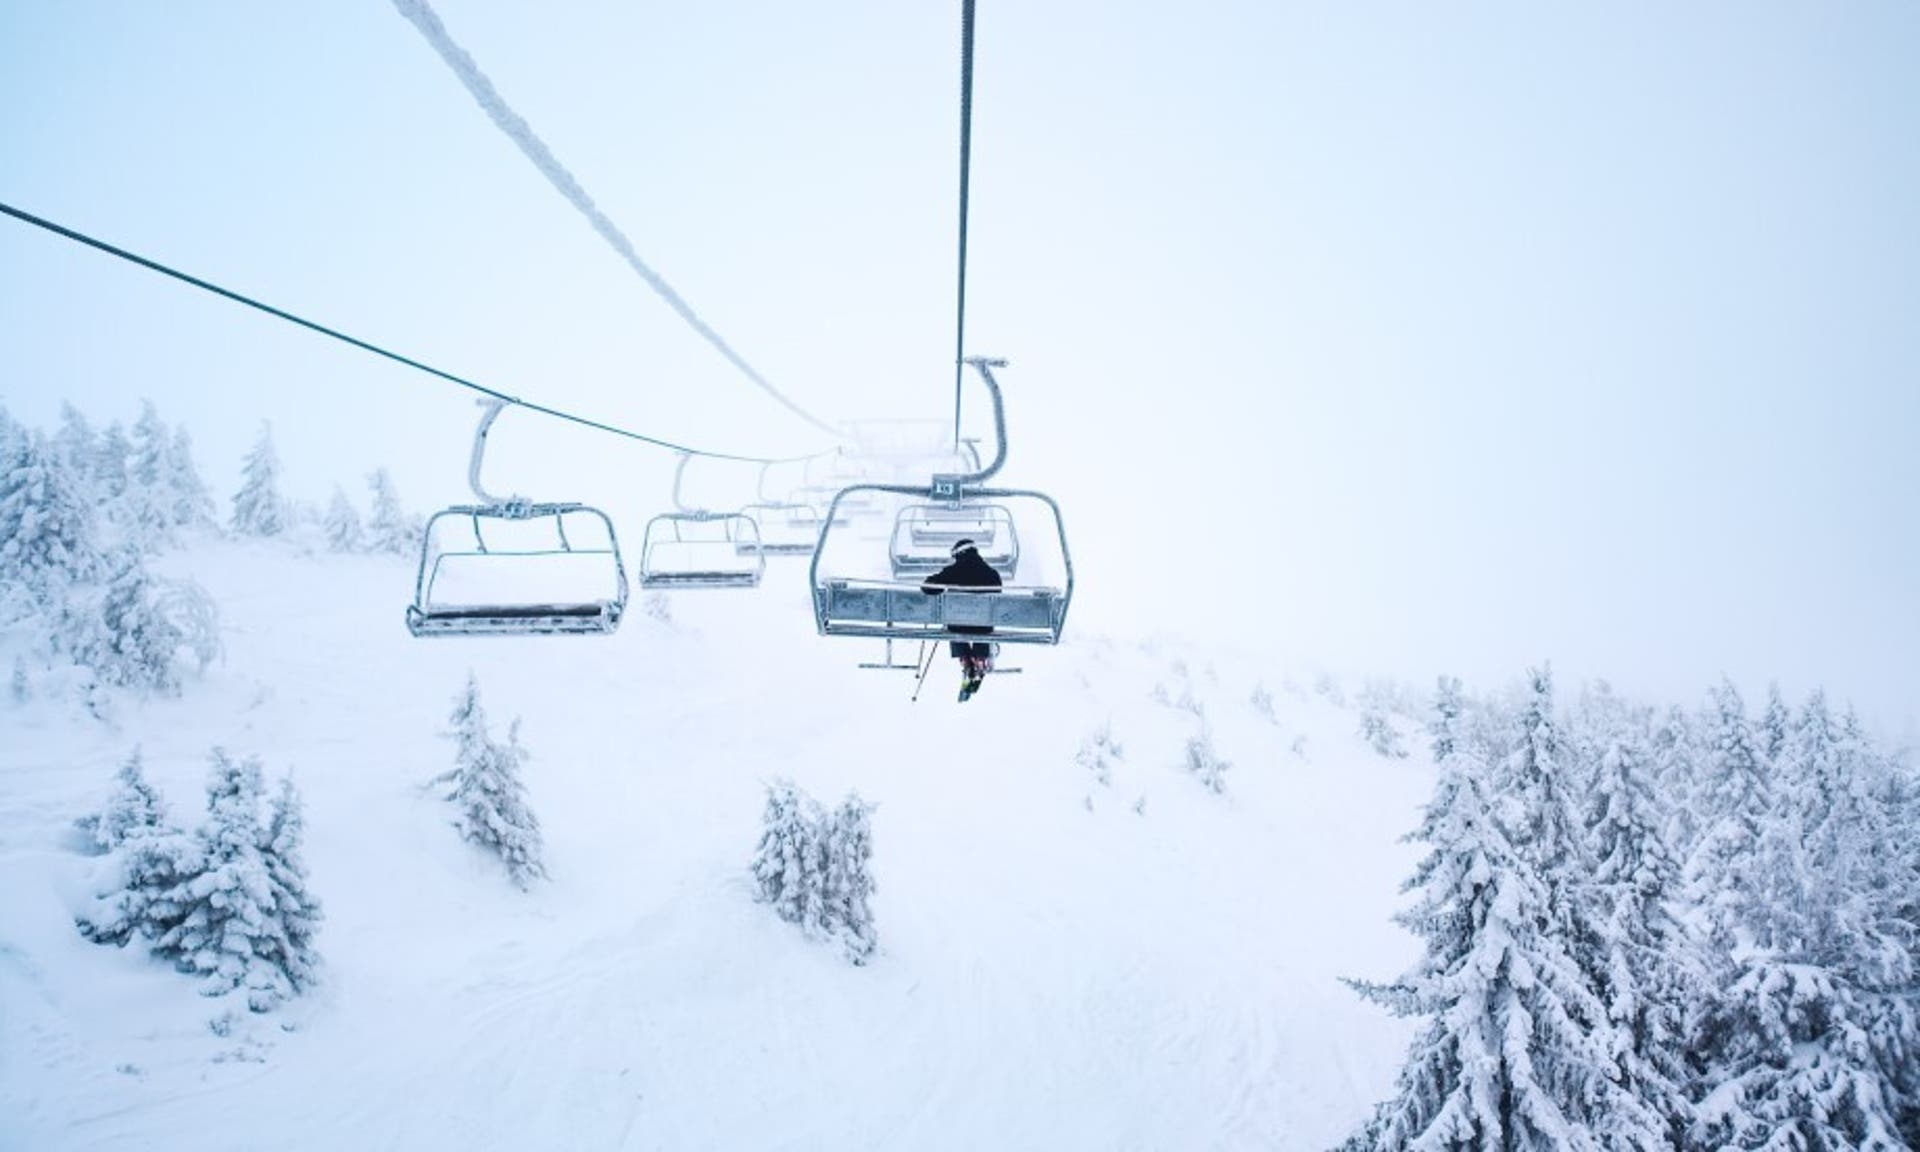  image of someone on a skilift, travelling up a snowy mountain 